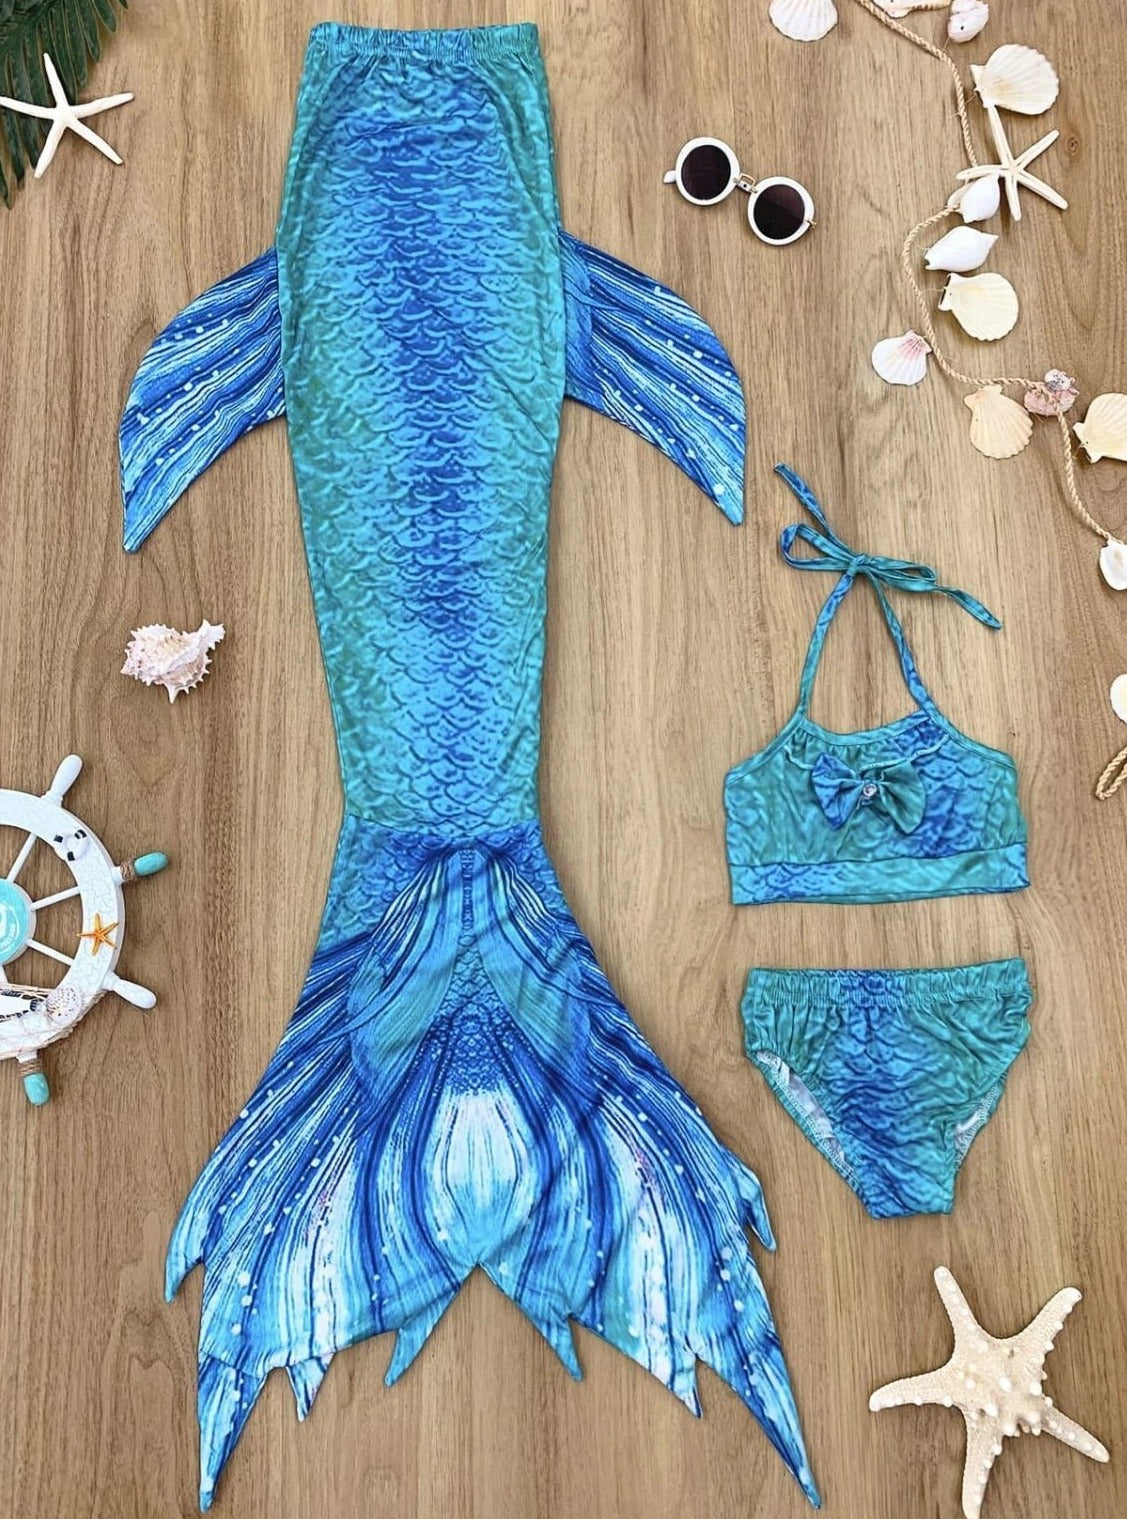 Girls Ombre Mermaid Scales Print Two Piece Swimsuit With Tail Skirt - Blue / 3T/4T - Girls Mermaid Swimsuit